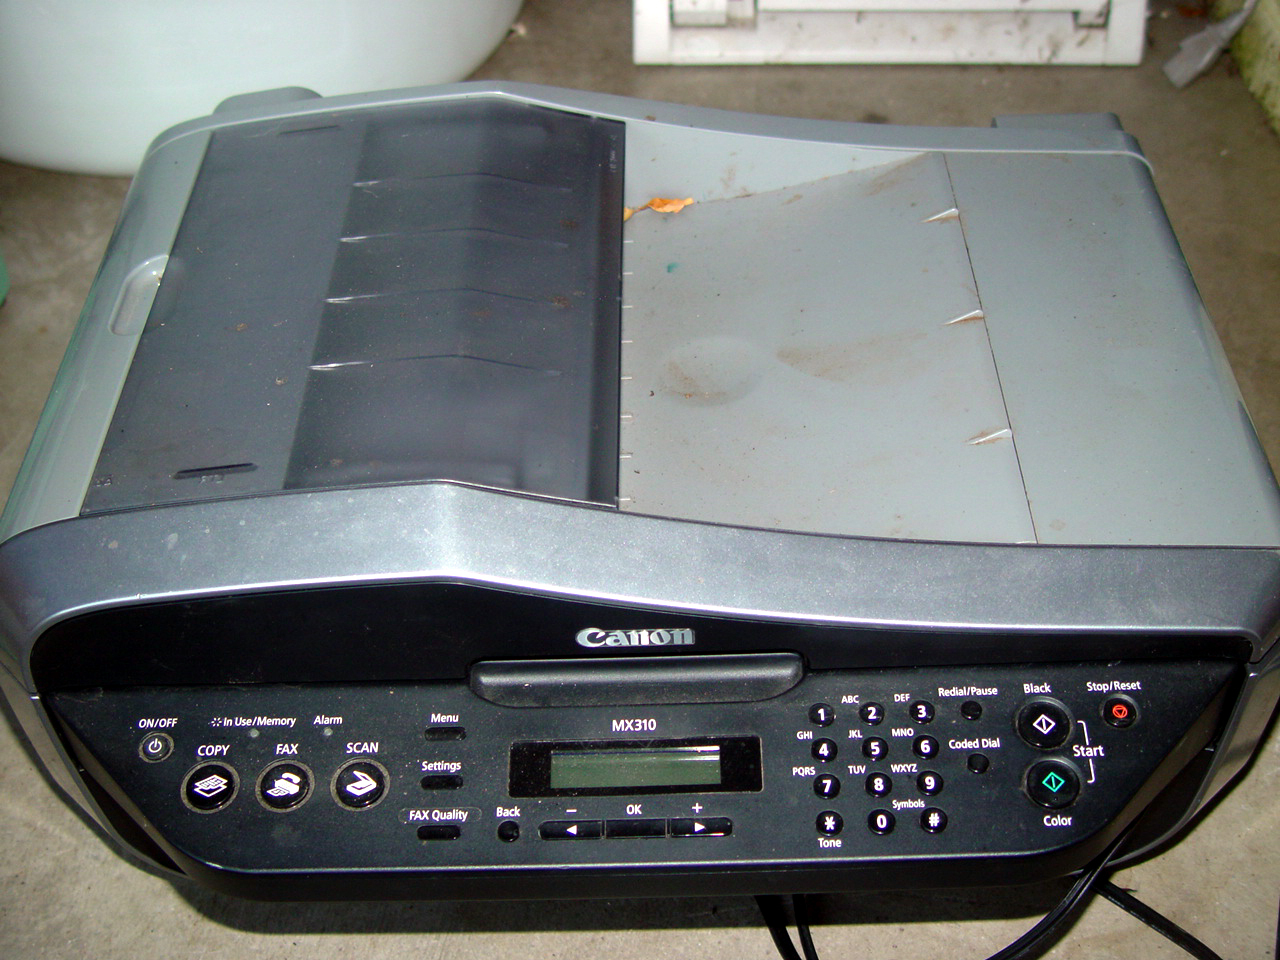 Don’t Waste eWaste: UnMaking a Canon Printer/Scanner/Fax into Parts